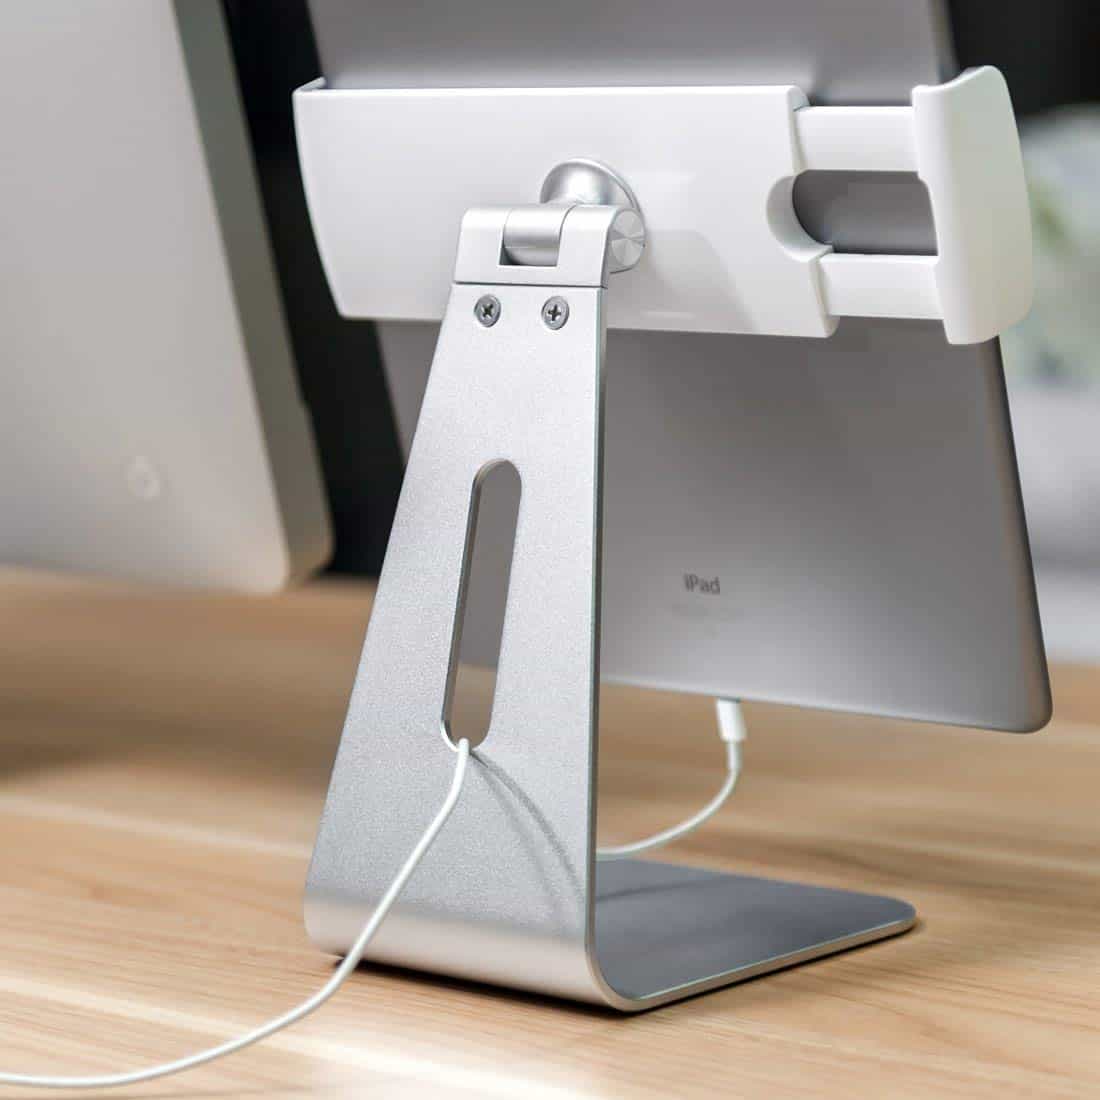 Sturdy and stylish, the AboveTek iPad stand is super-adjustable.